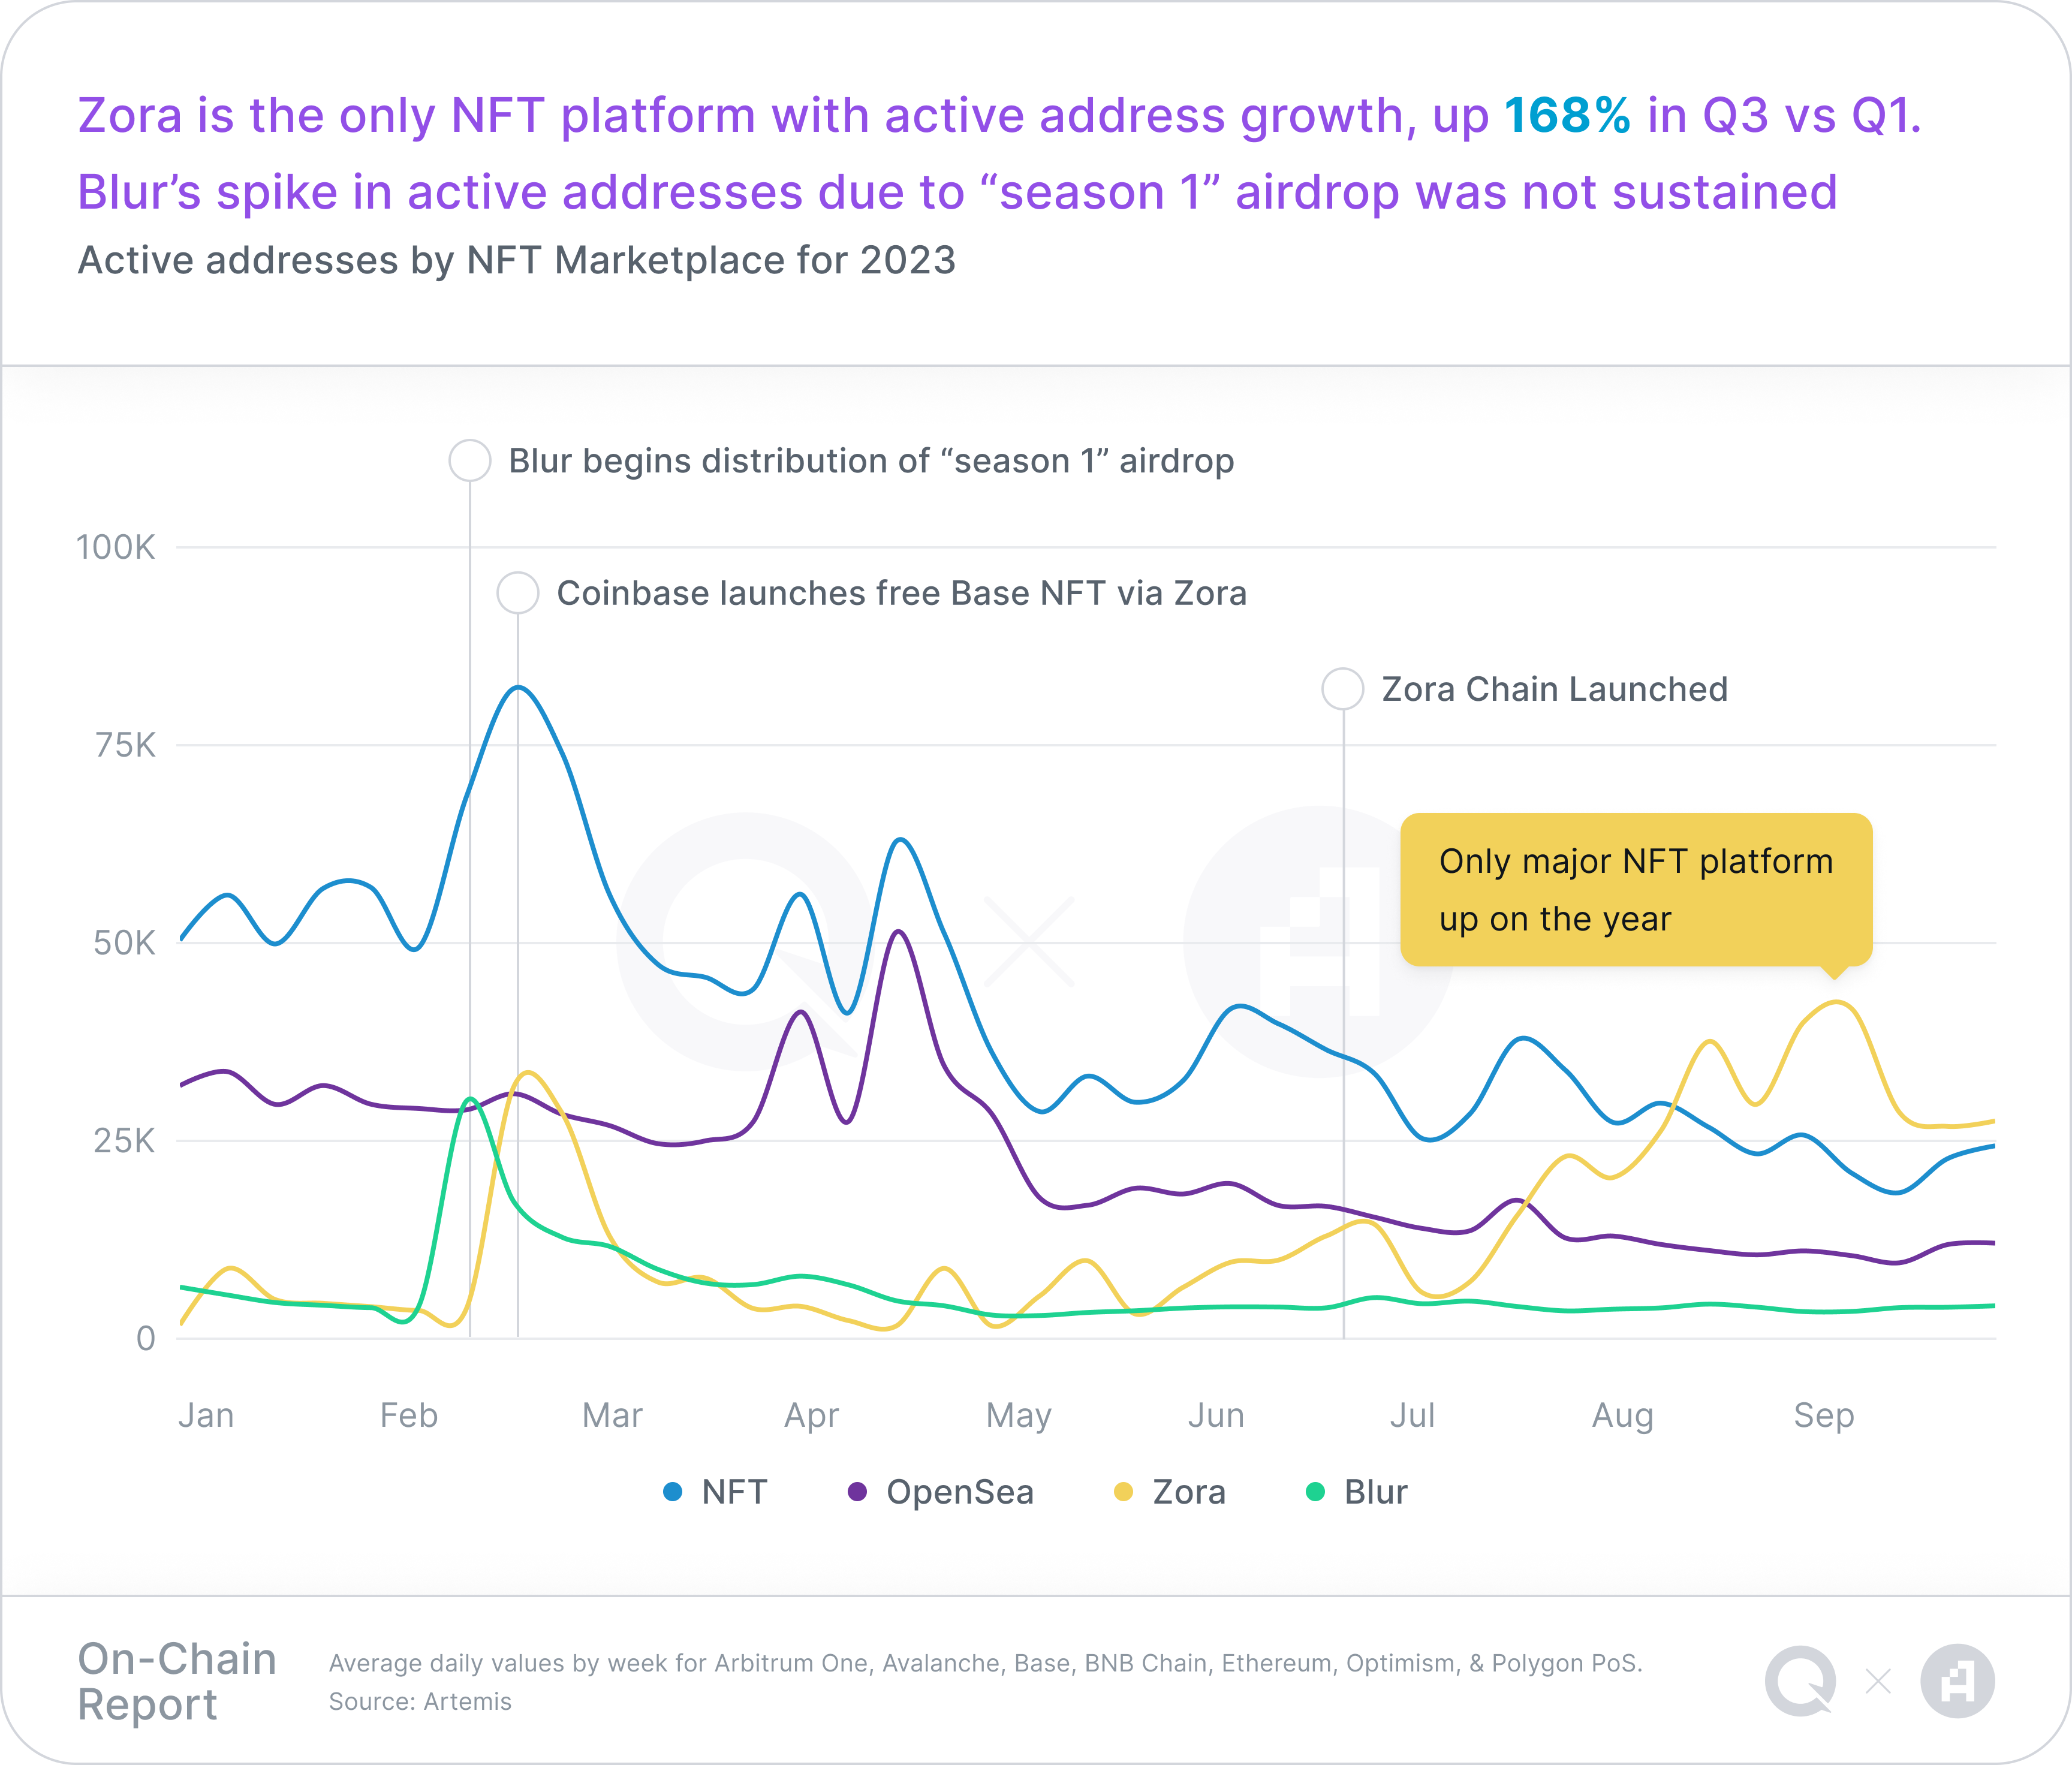 A chart representing Active addresses by NFT Marketplace for 2023, with a takeaway headline of "Zora is the only NFT platform with active address growth, up 168% in Q3 vs Q1. Blur’s spike in active addresses due to “season 1” airdrop was not sustained"